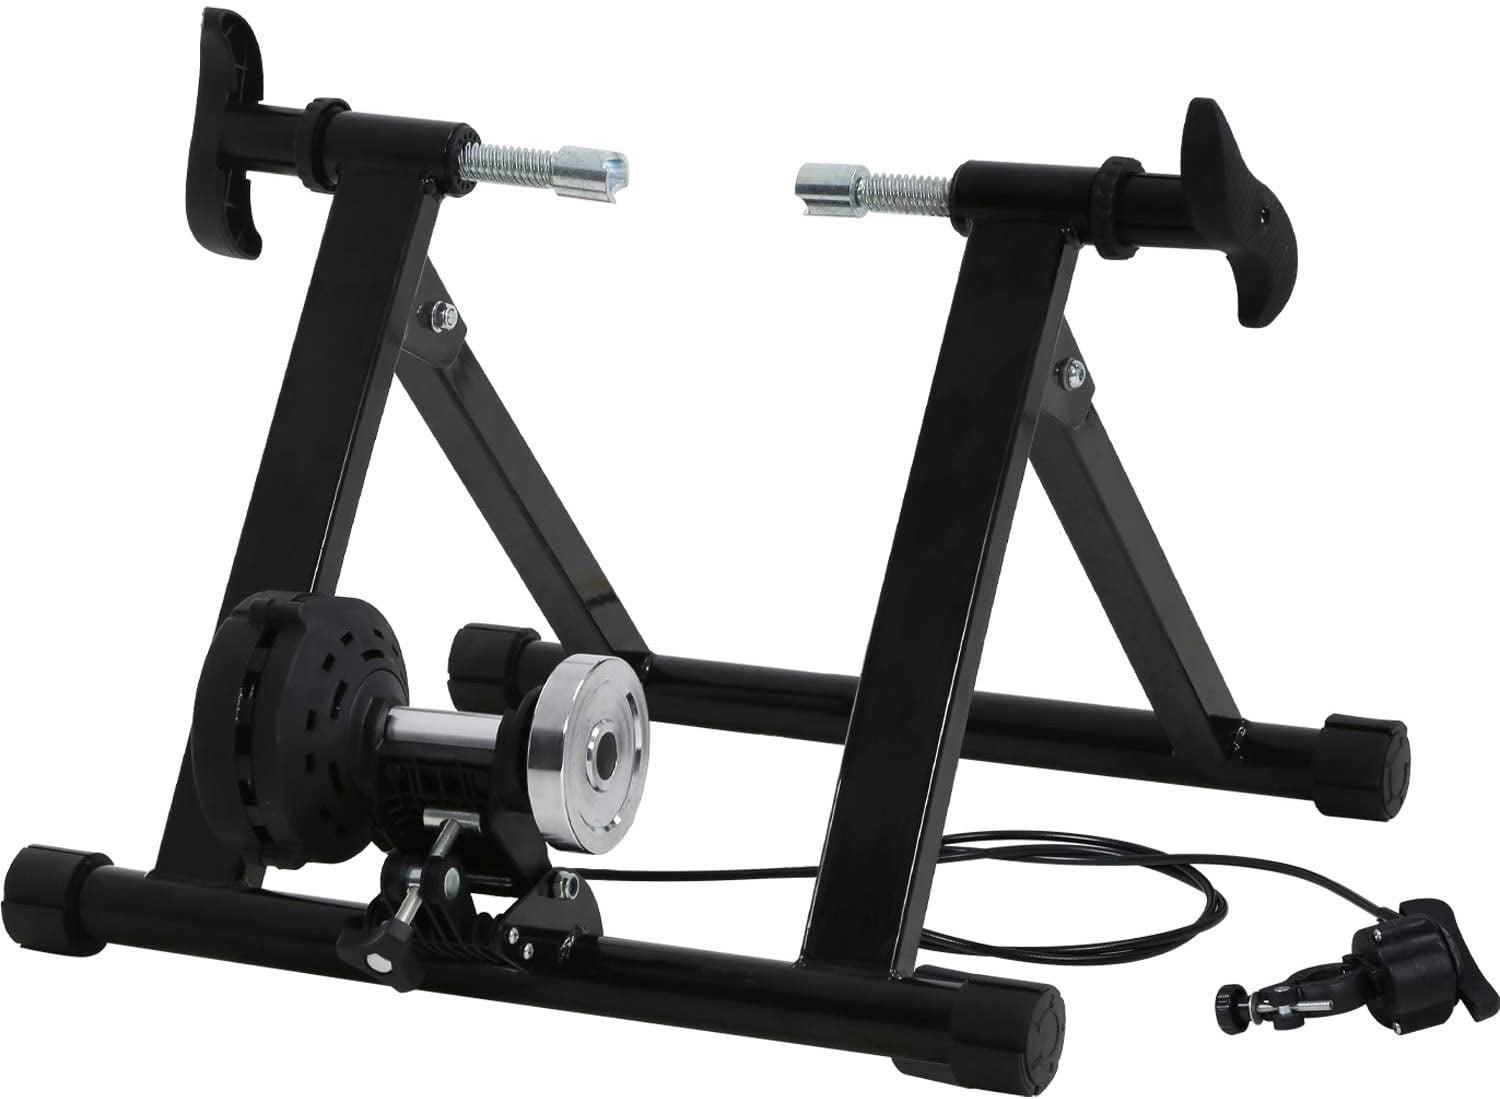 Magnetic Indoor Bike Exercise Station Stand Bicycle Trainer 5 Level Resistance S